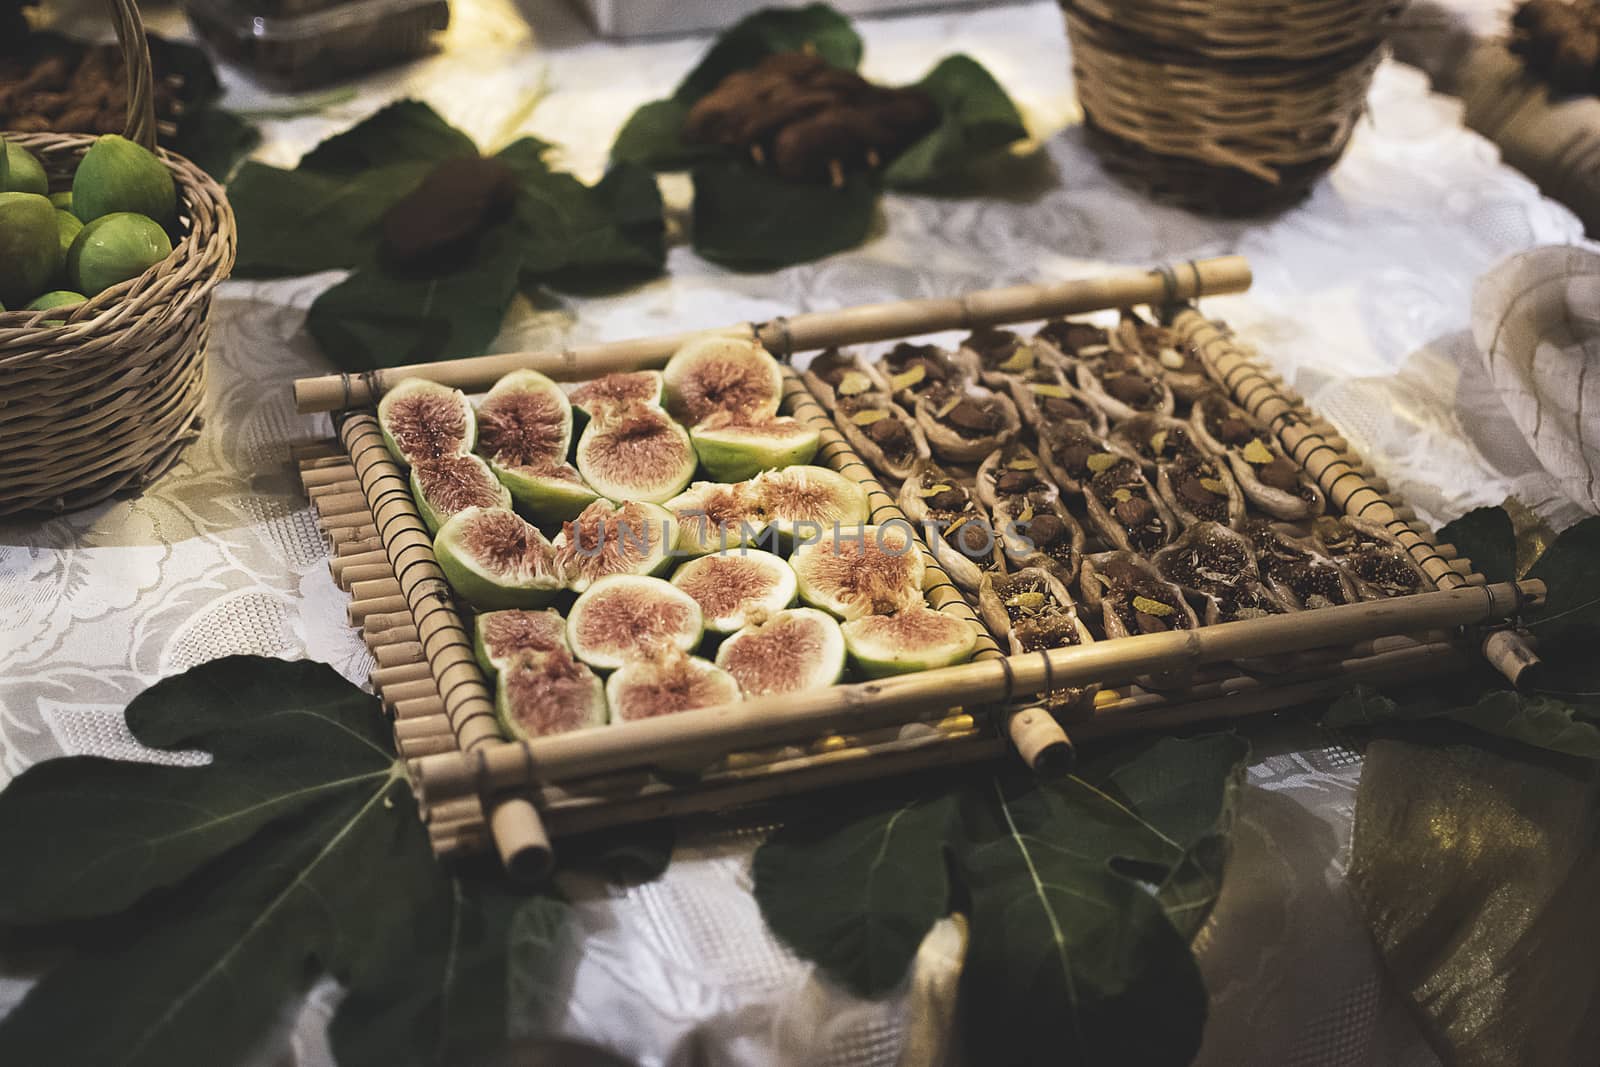 Figs of various kinds, almond, open with spices